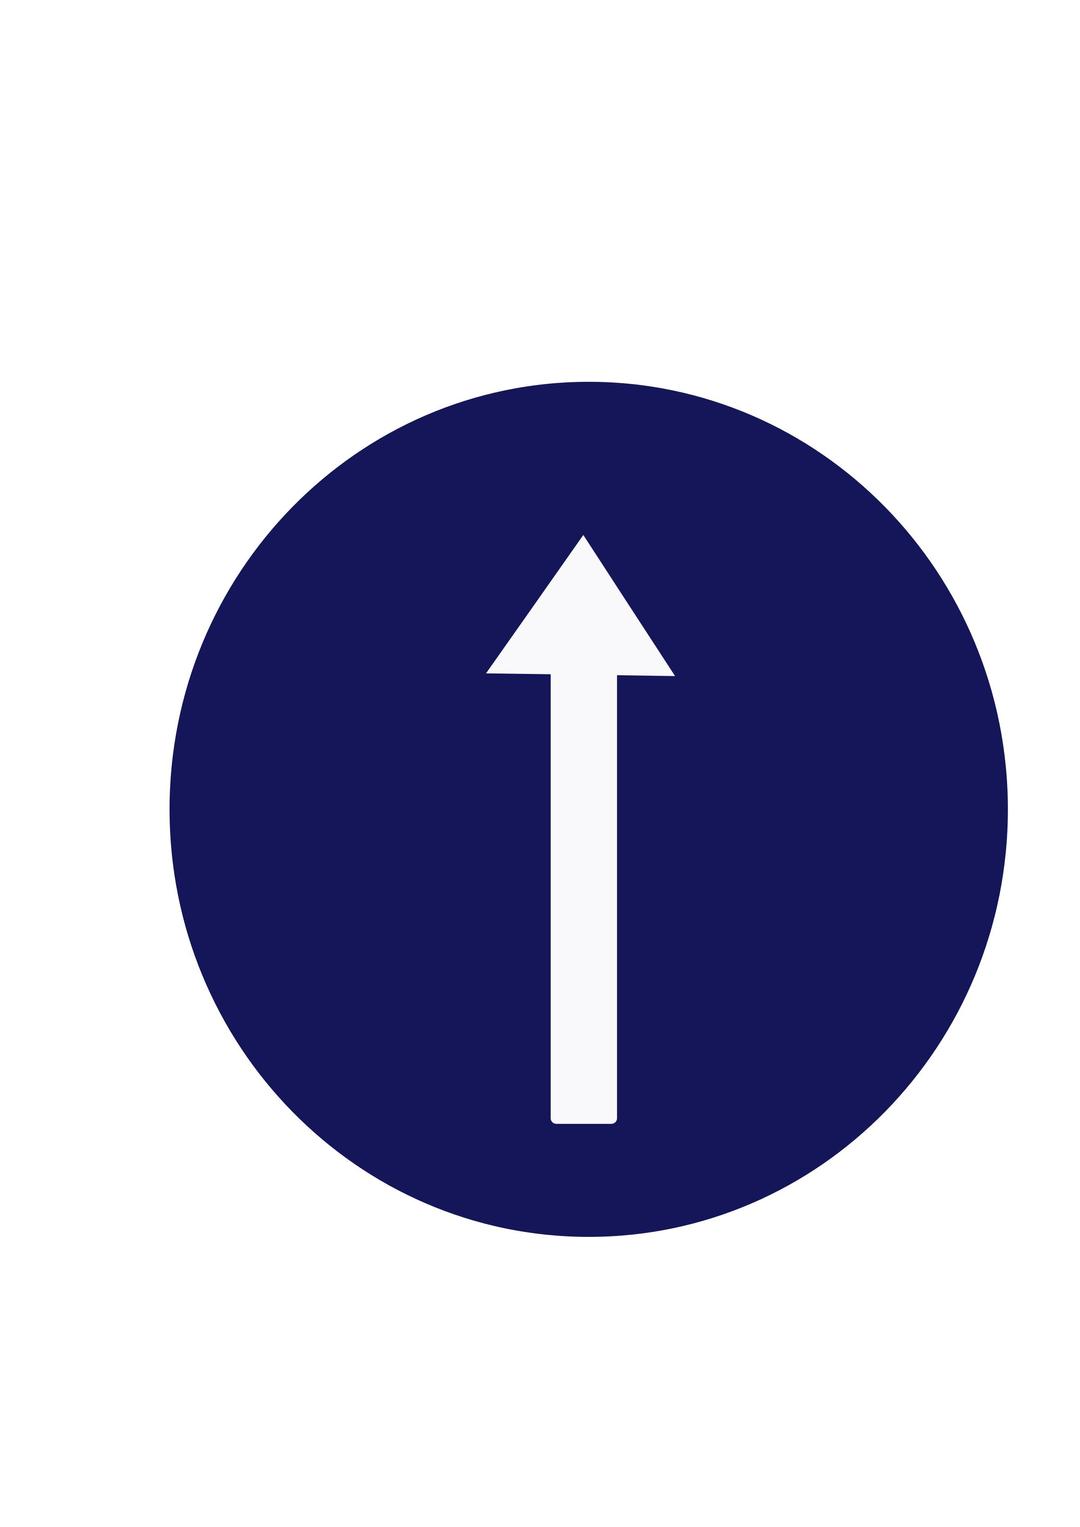 Indian road sign - Compulsory ahead only png transparent